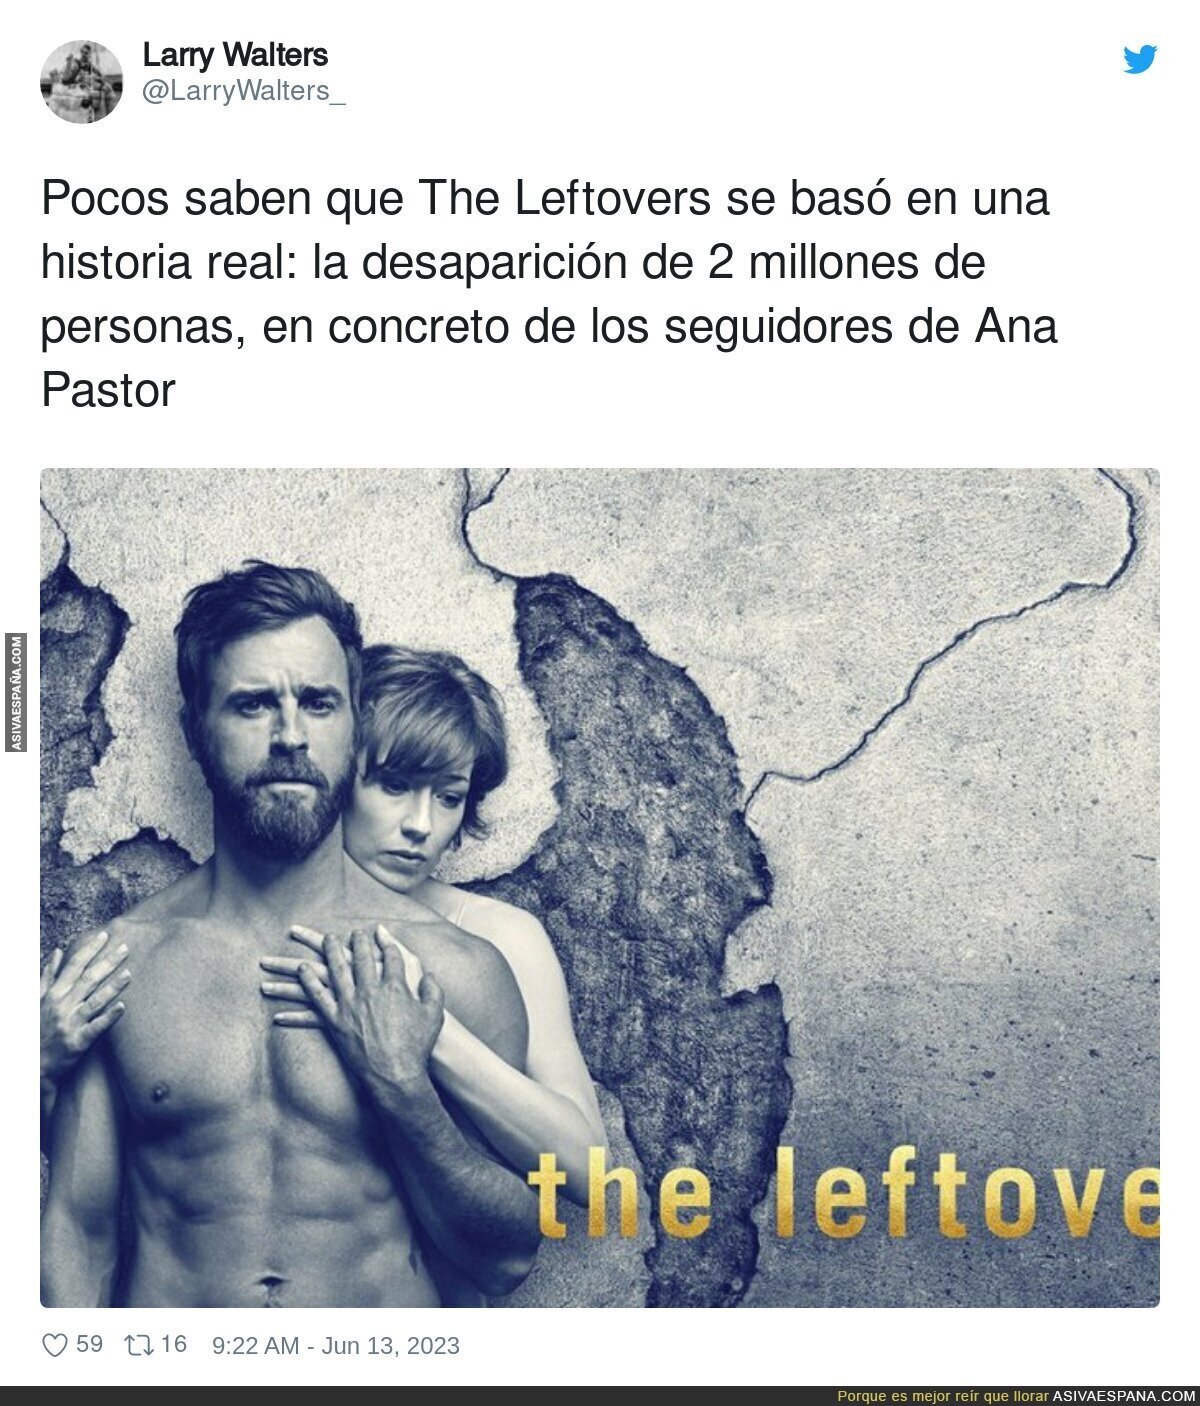 The Leftovers es real